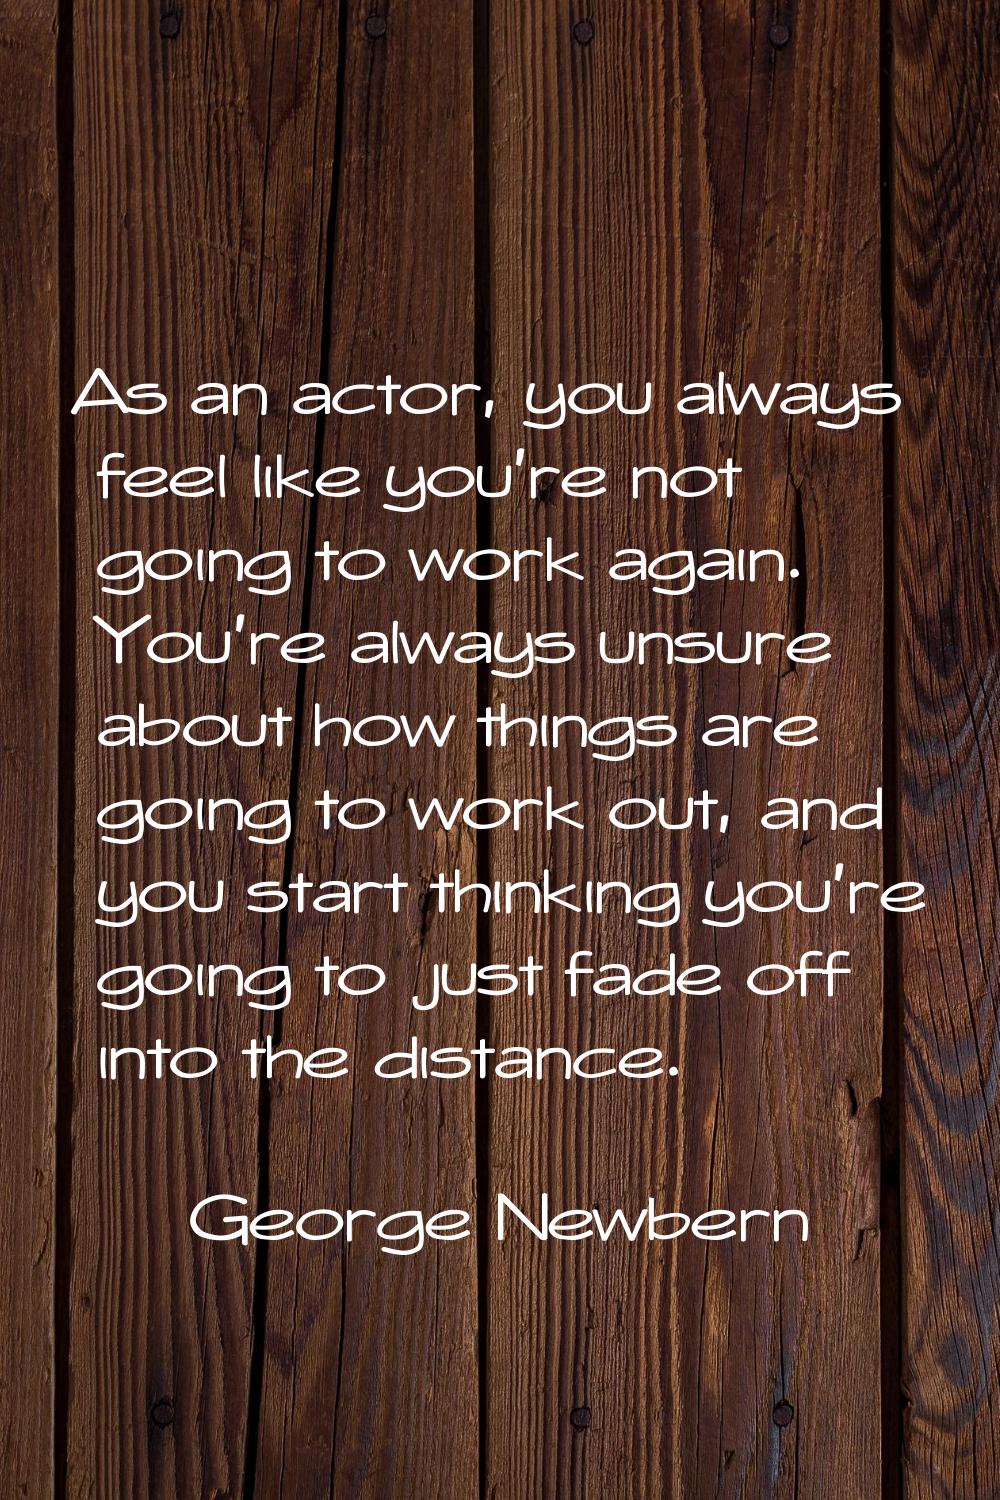 As an actor, you always feel like you're not going to work again. You're always unsure about how th